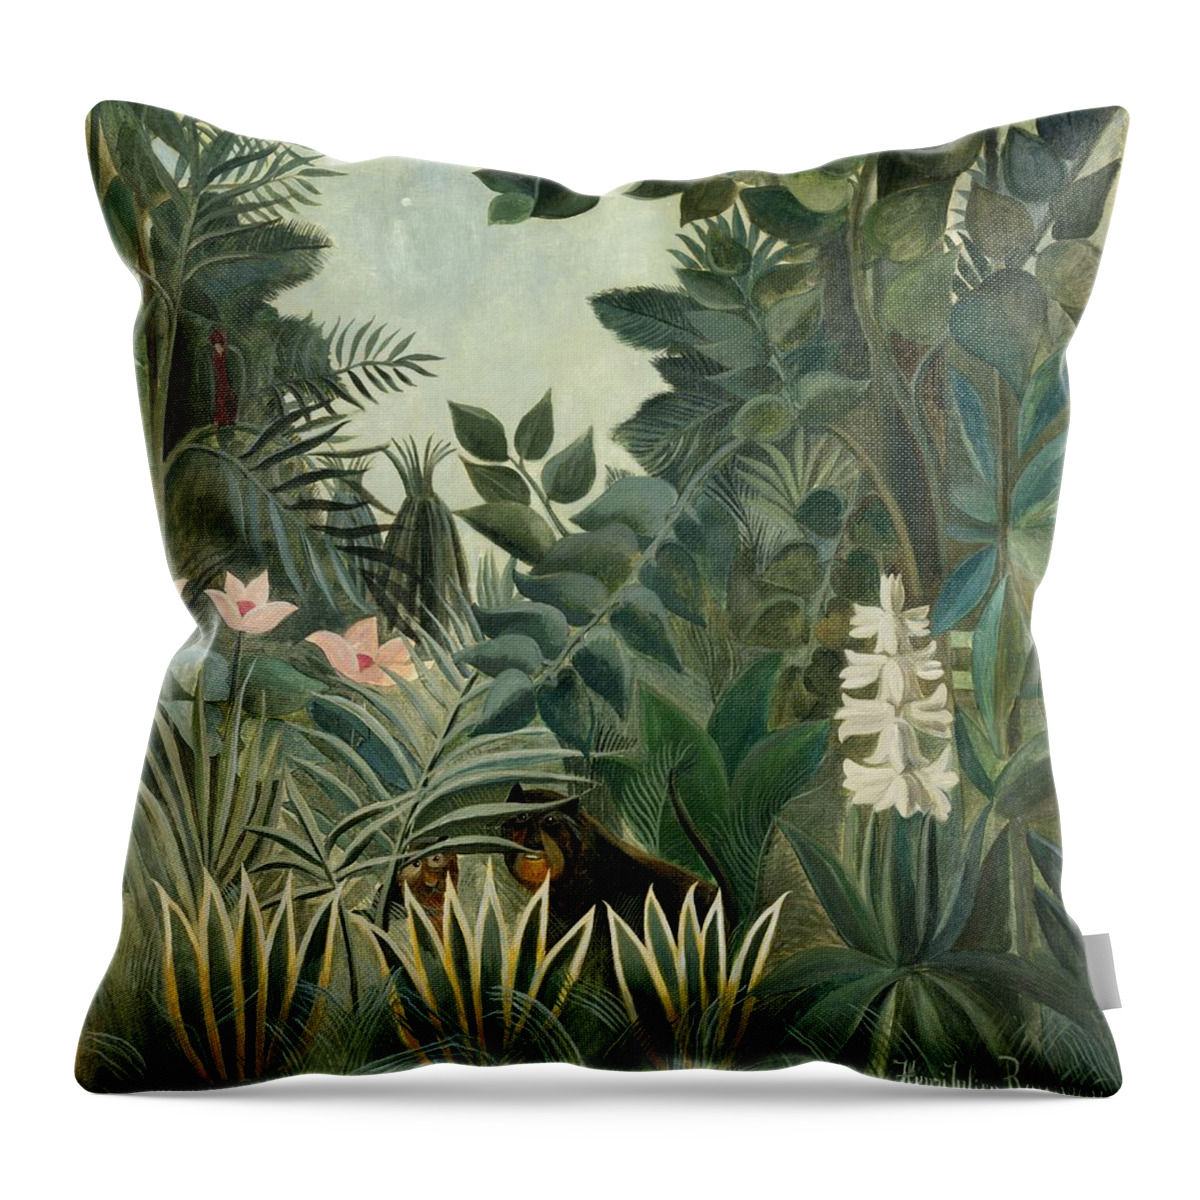 Henri Rousseau Throw Pillow featuring the painting The Equatorial Jungle by Henri Rousseau